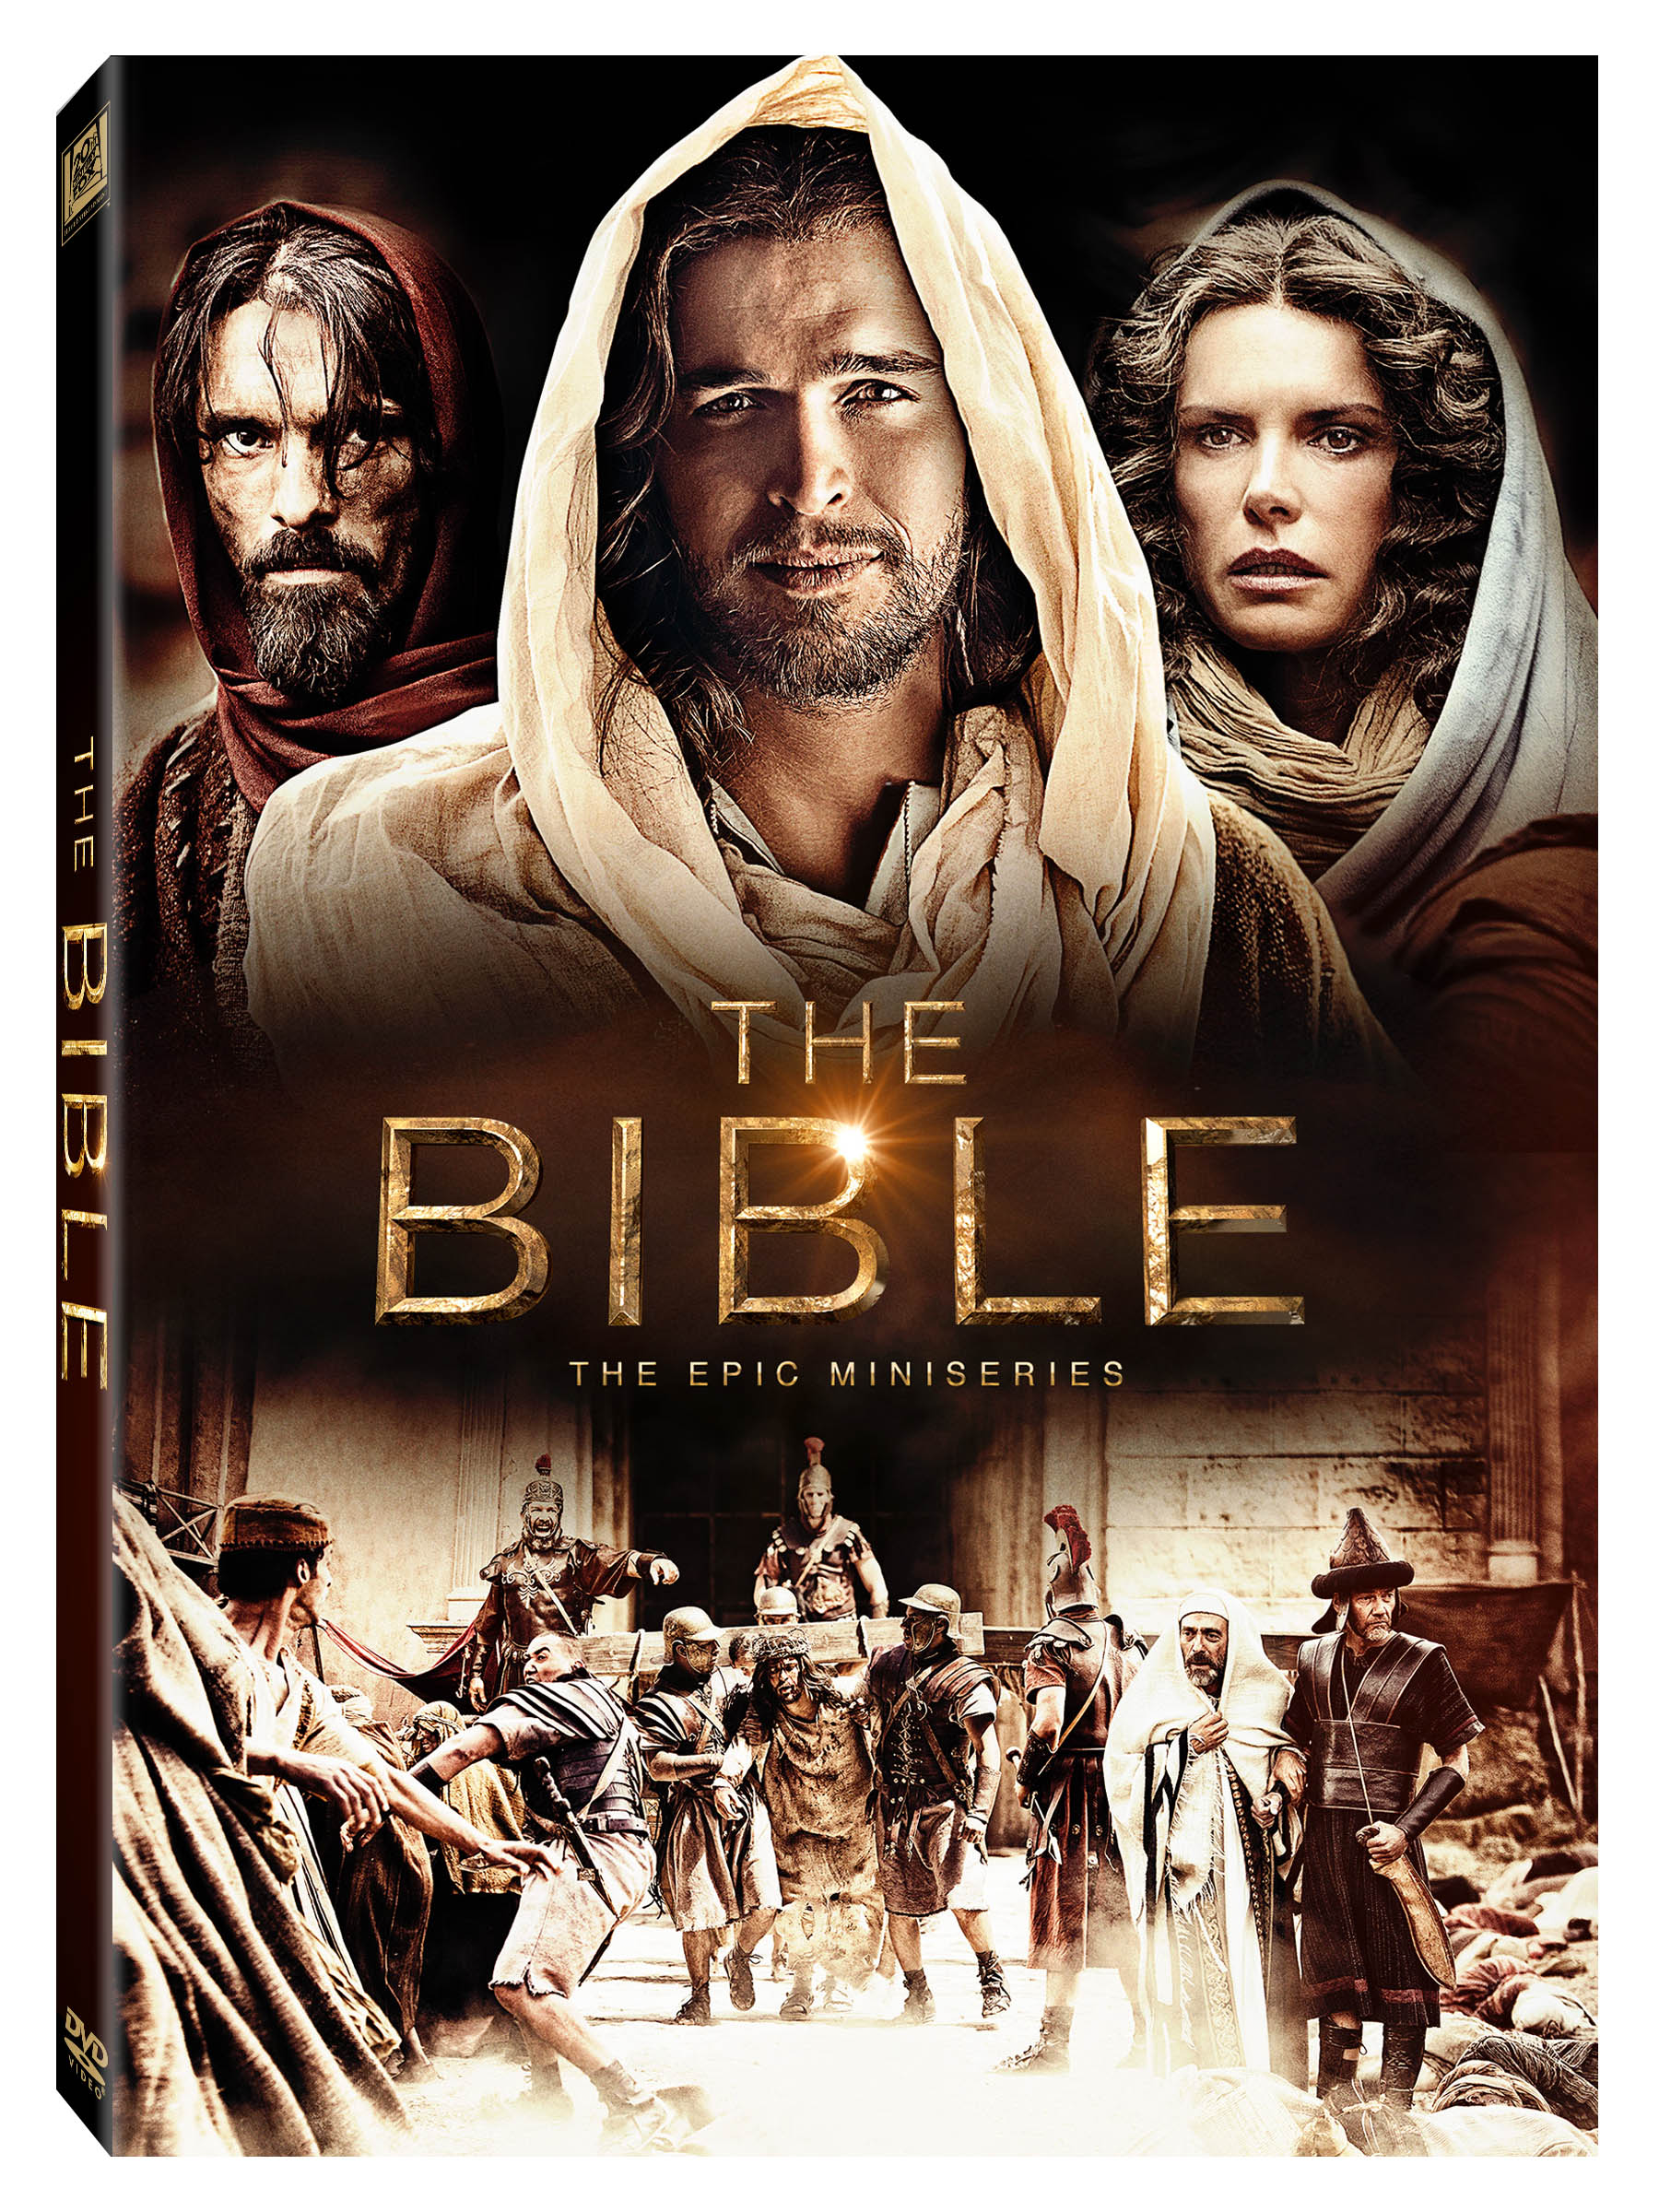 The Bible The Epic Miniseries DVD Spine